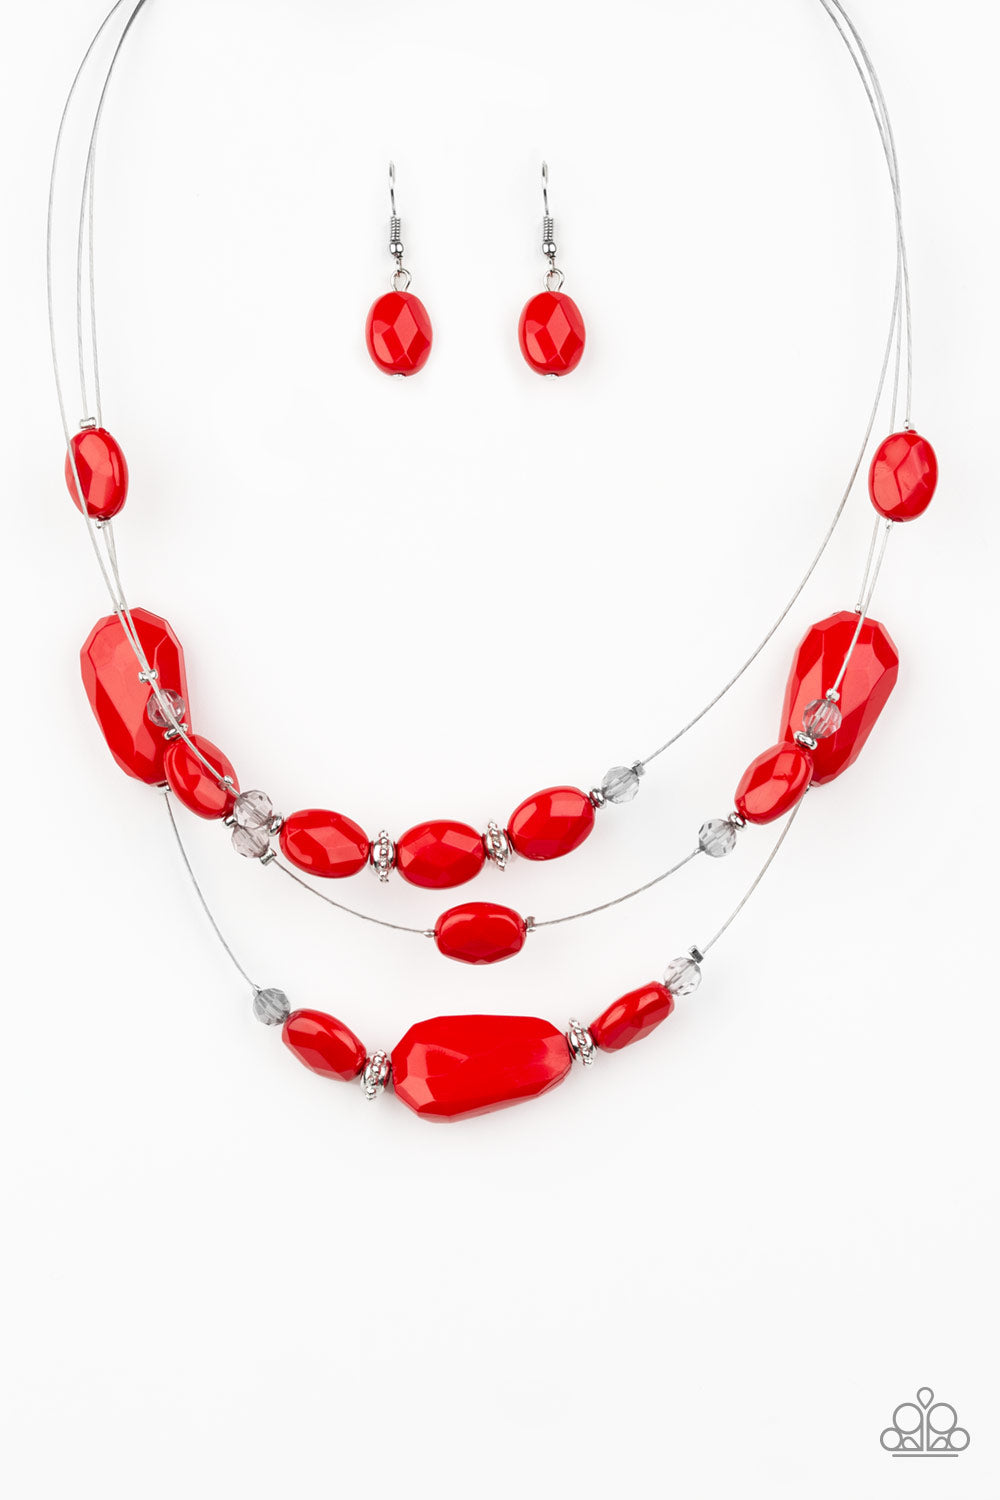 Radiant Reflections - Red Necklace